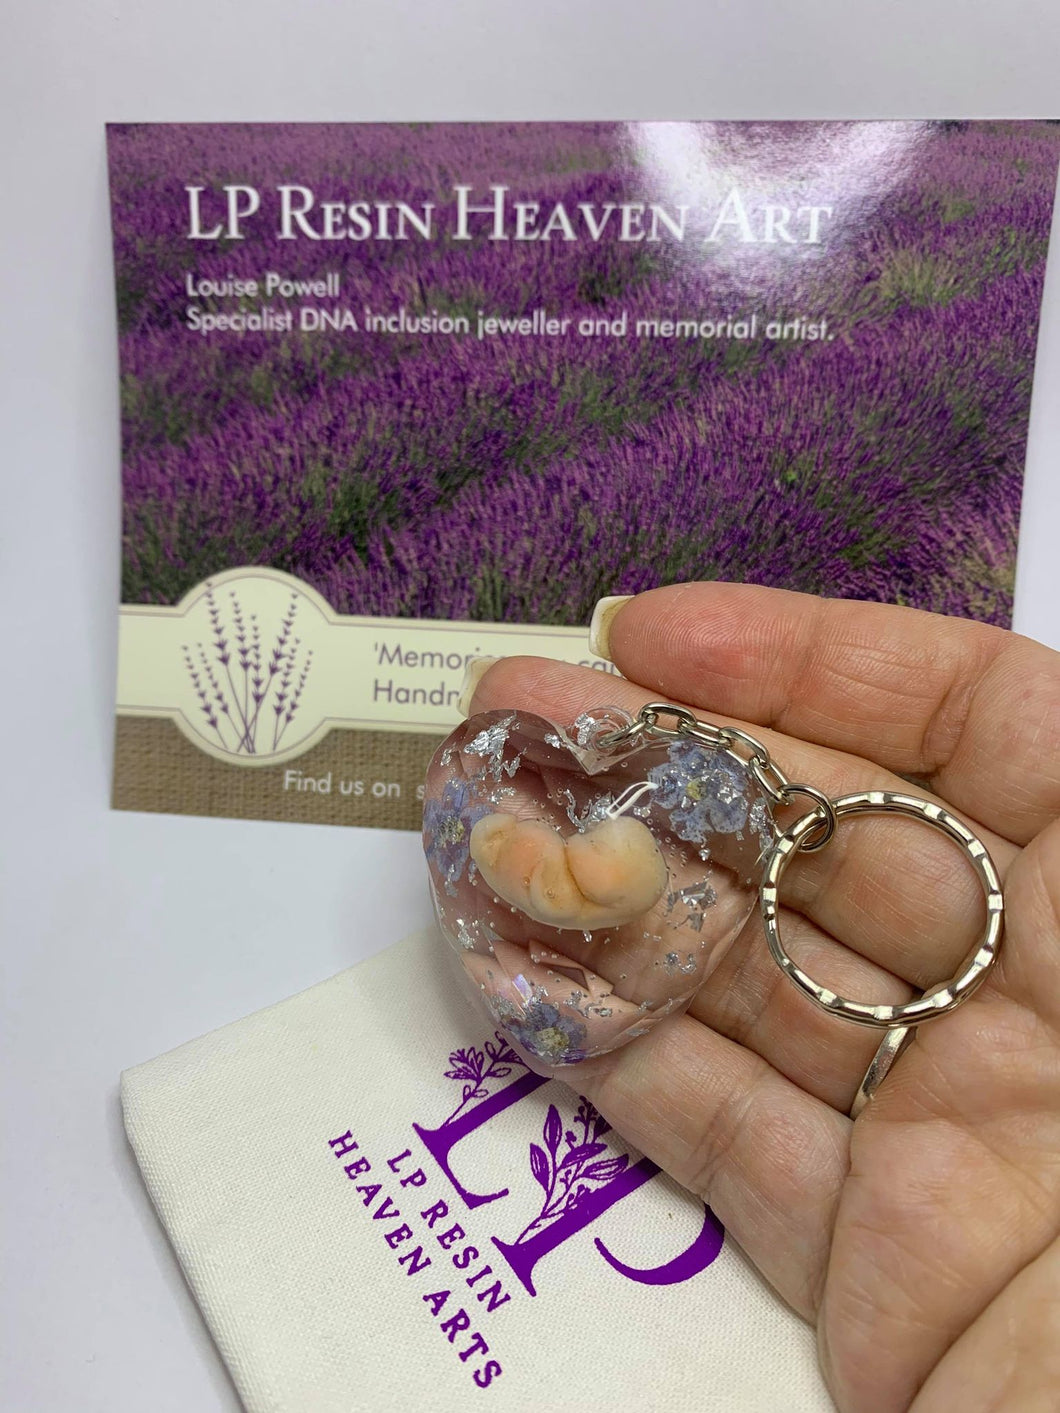 8-9 weeks womb baby keyring with forget me not flowers